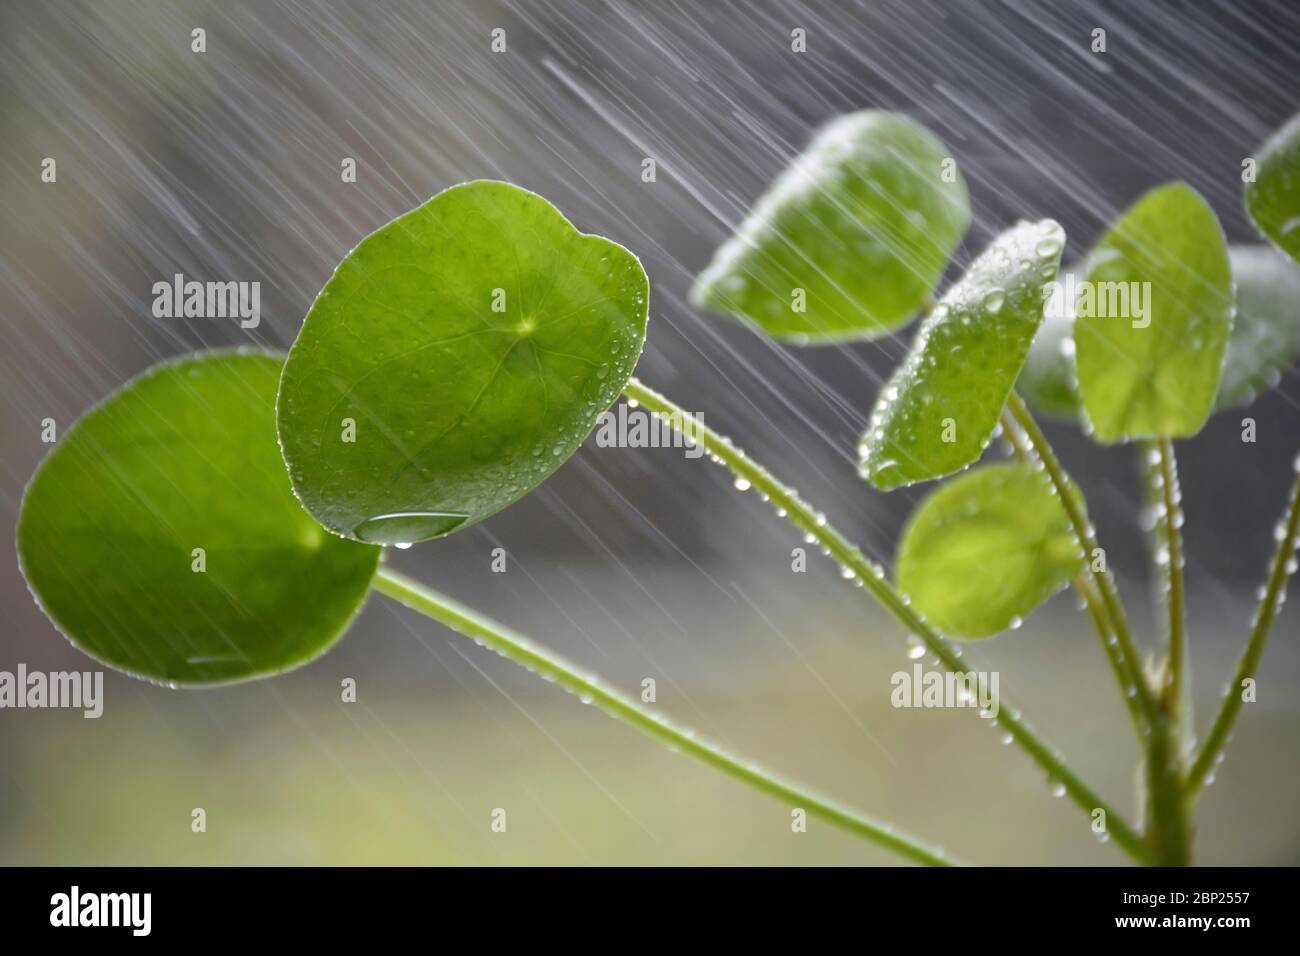 Watering a Pilea peperomioides (Chinese money plant) plant. Spraying water. Close up splash of water. Beautiful drops of water on green leaves. Stock Photo